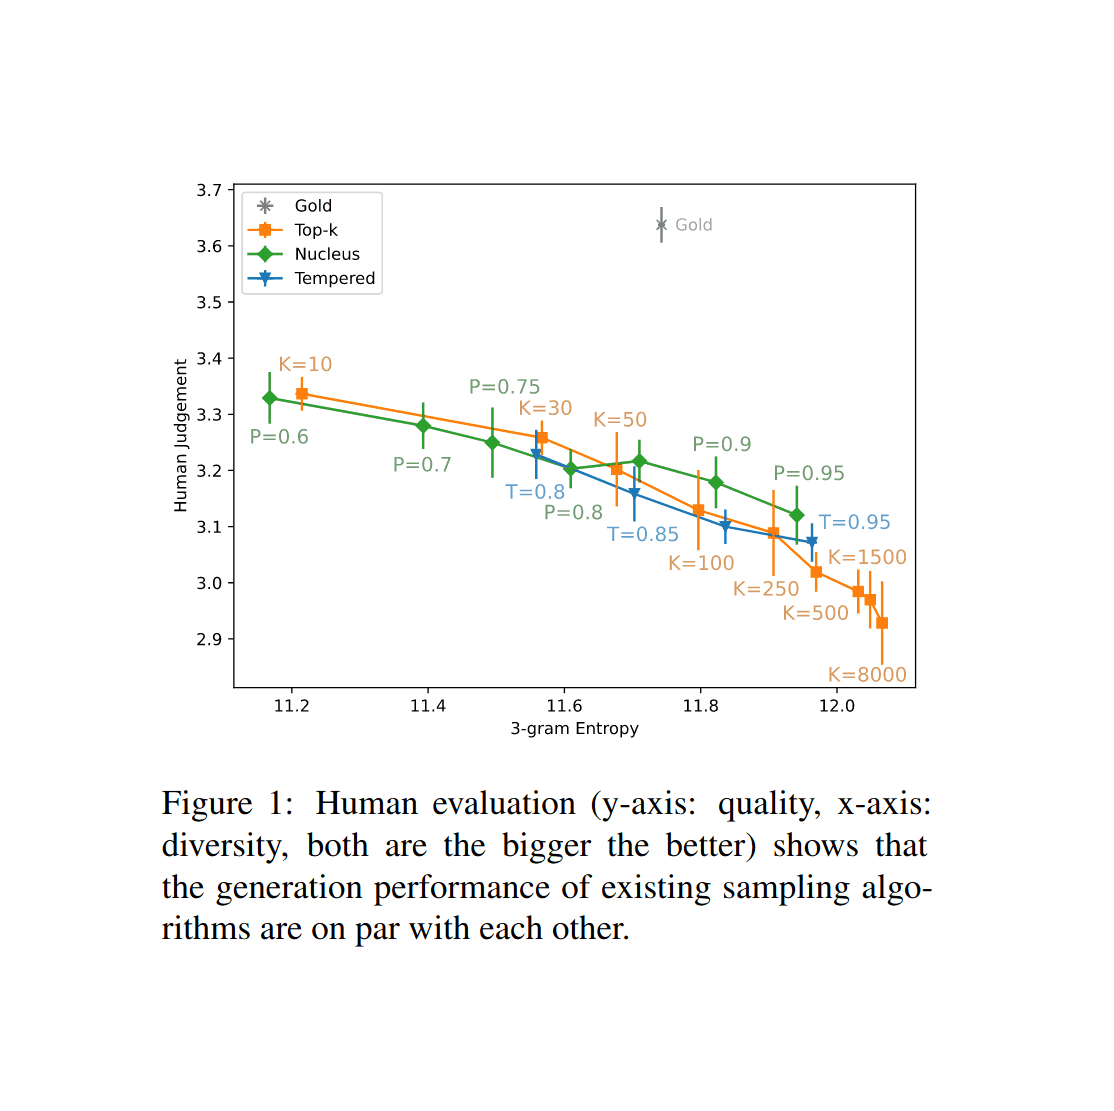 The quality vs diversity tradeoff for top-k/nucleus sampling on GPT-2 news articles: more extreme settings like top-k = 10 / topp = 0.6 are equally good to get the highest human ratings—but both come at at the expense of variety of possible completions. (Nadeem et al 2020; see also Zhang et al 2020, Dou et al 2021)